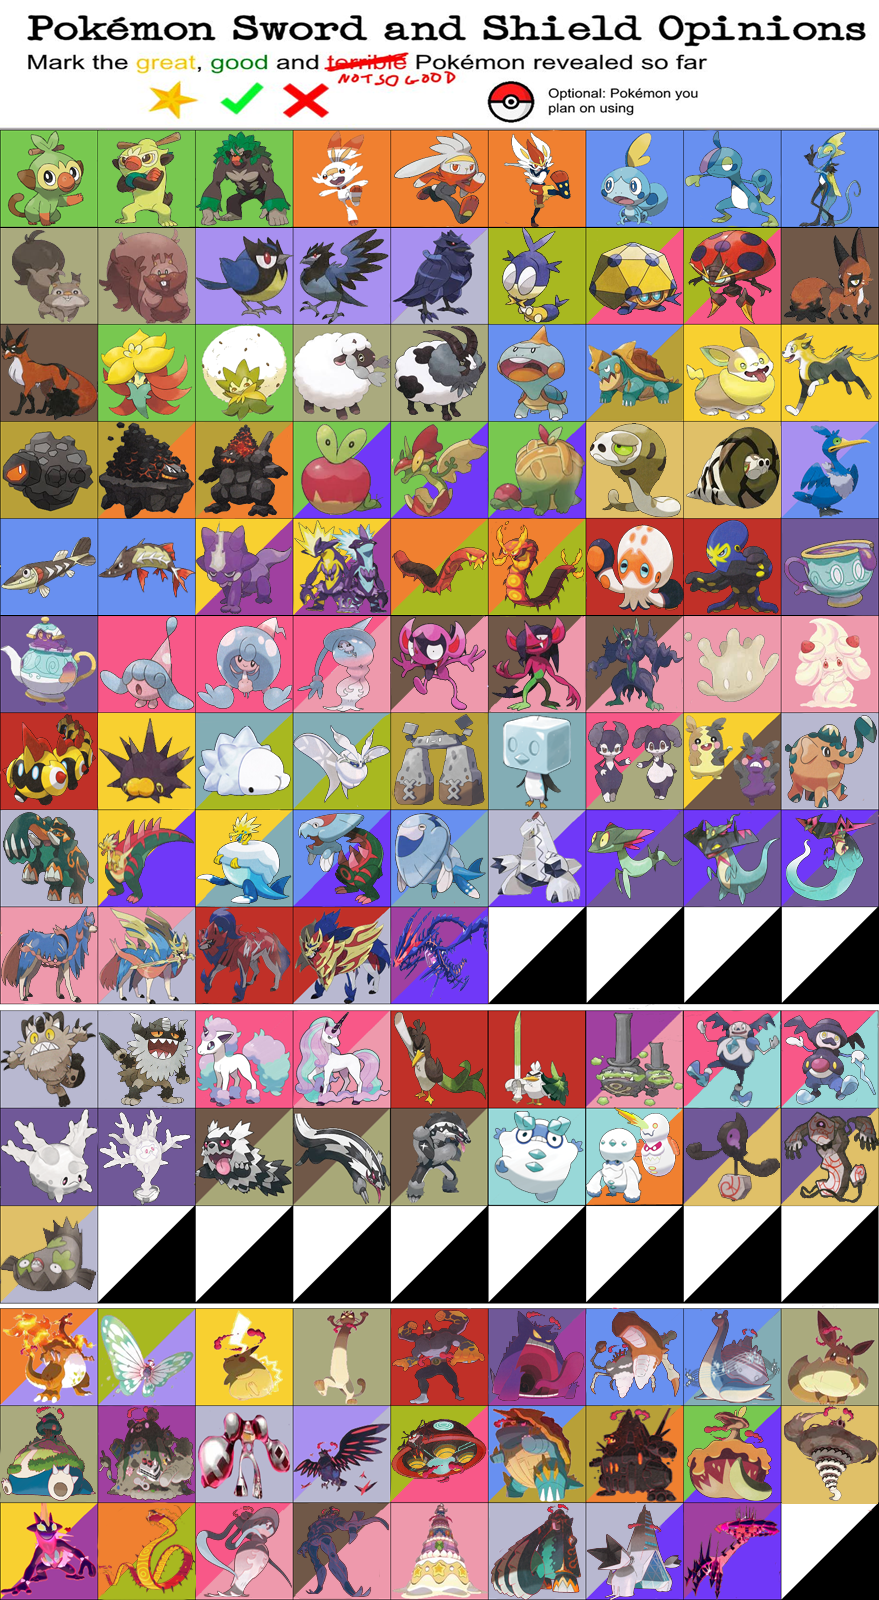 Pokemon Scarlet and Violet Pokedex Images by Macuarrorro on DeviantArt